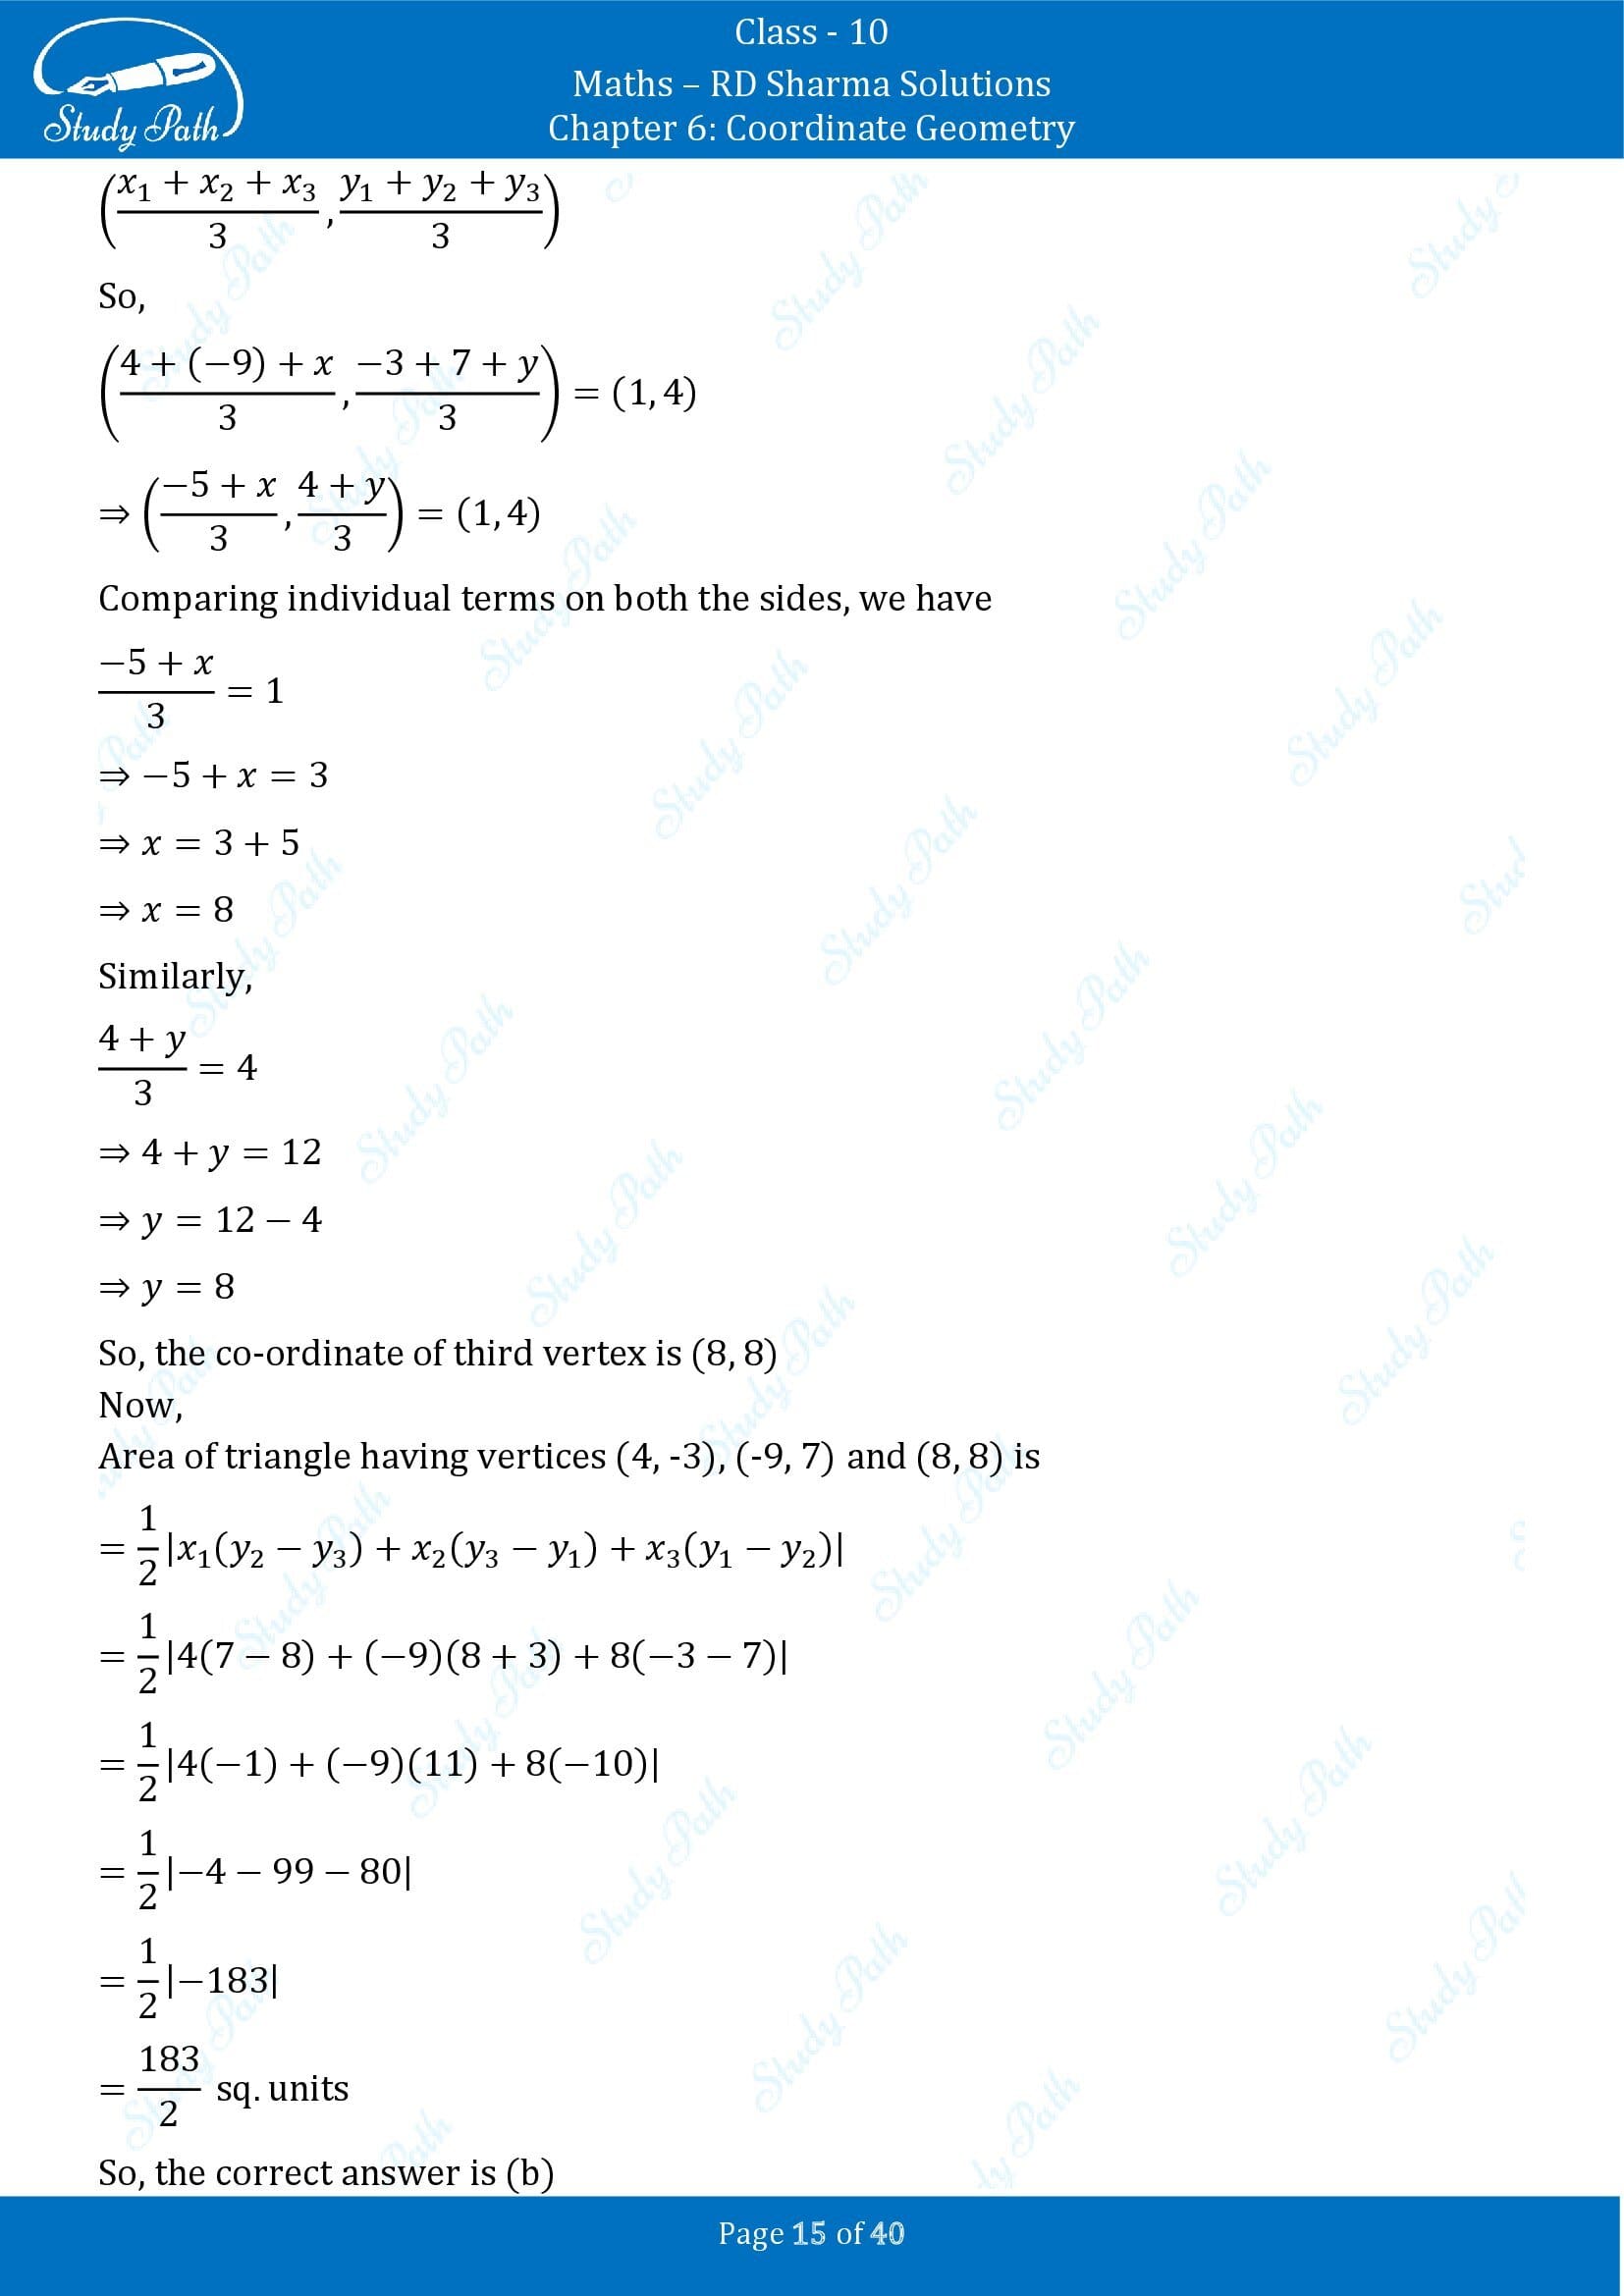 RD Sharma Solutions Class 10 Chapter 6 Coordinate Geometry Multiple Choice Question MCQs 00015